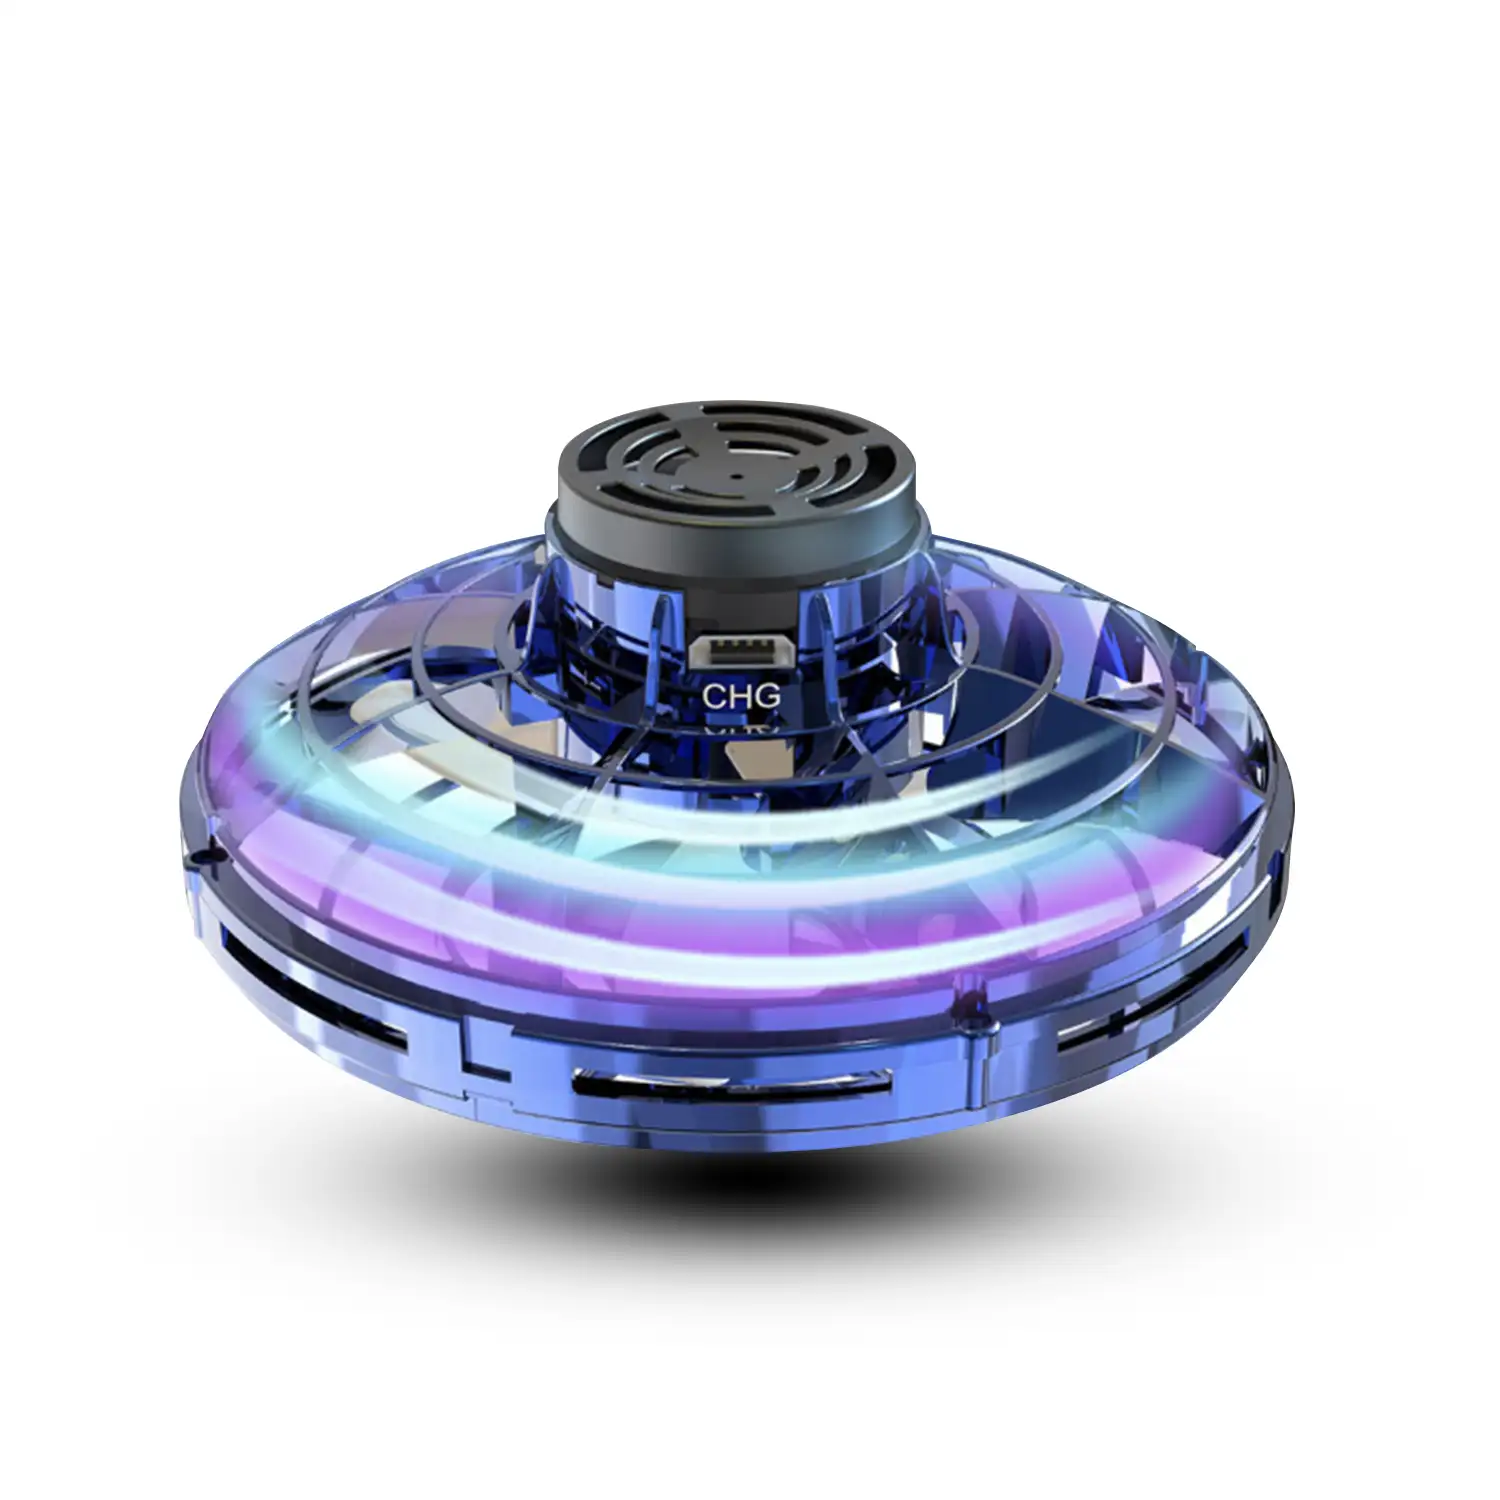 Flying Spinner con luces LED.